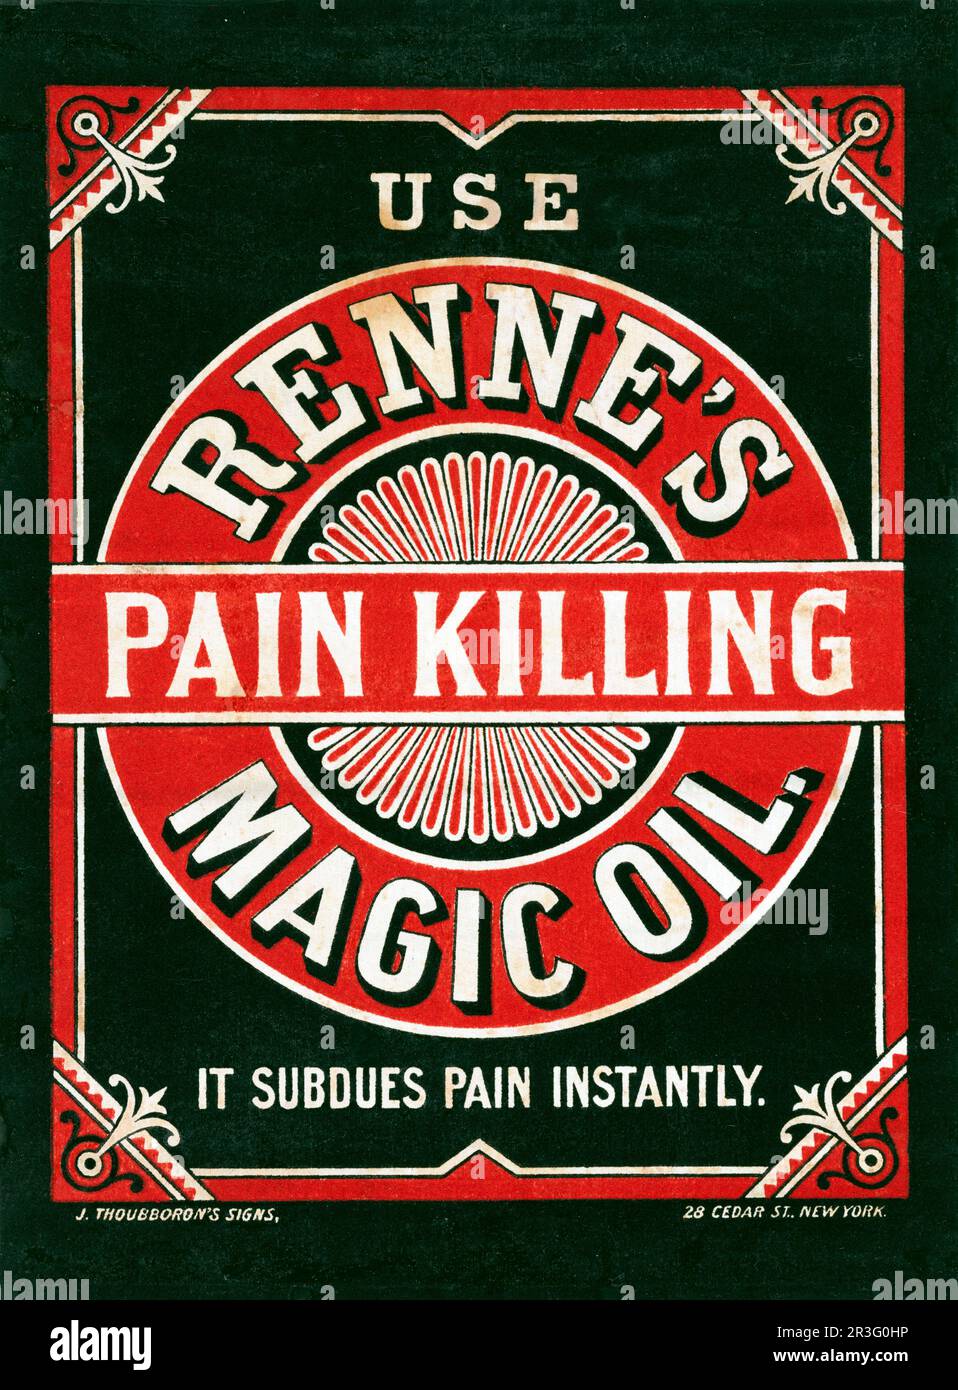 Vintage advertisement for Renne's pain killing magic oil, with decorative border. Stock Photo